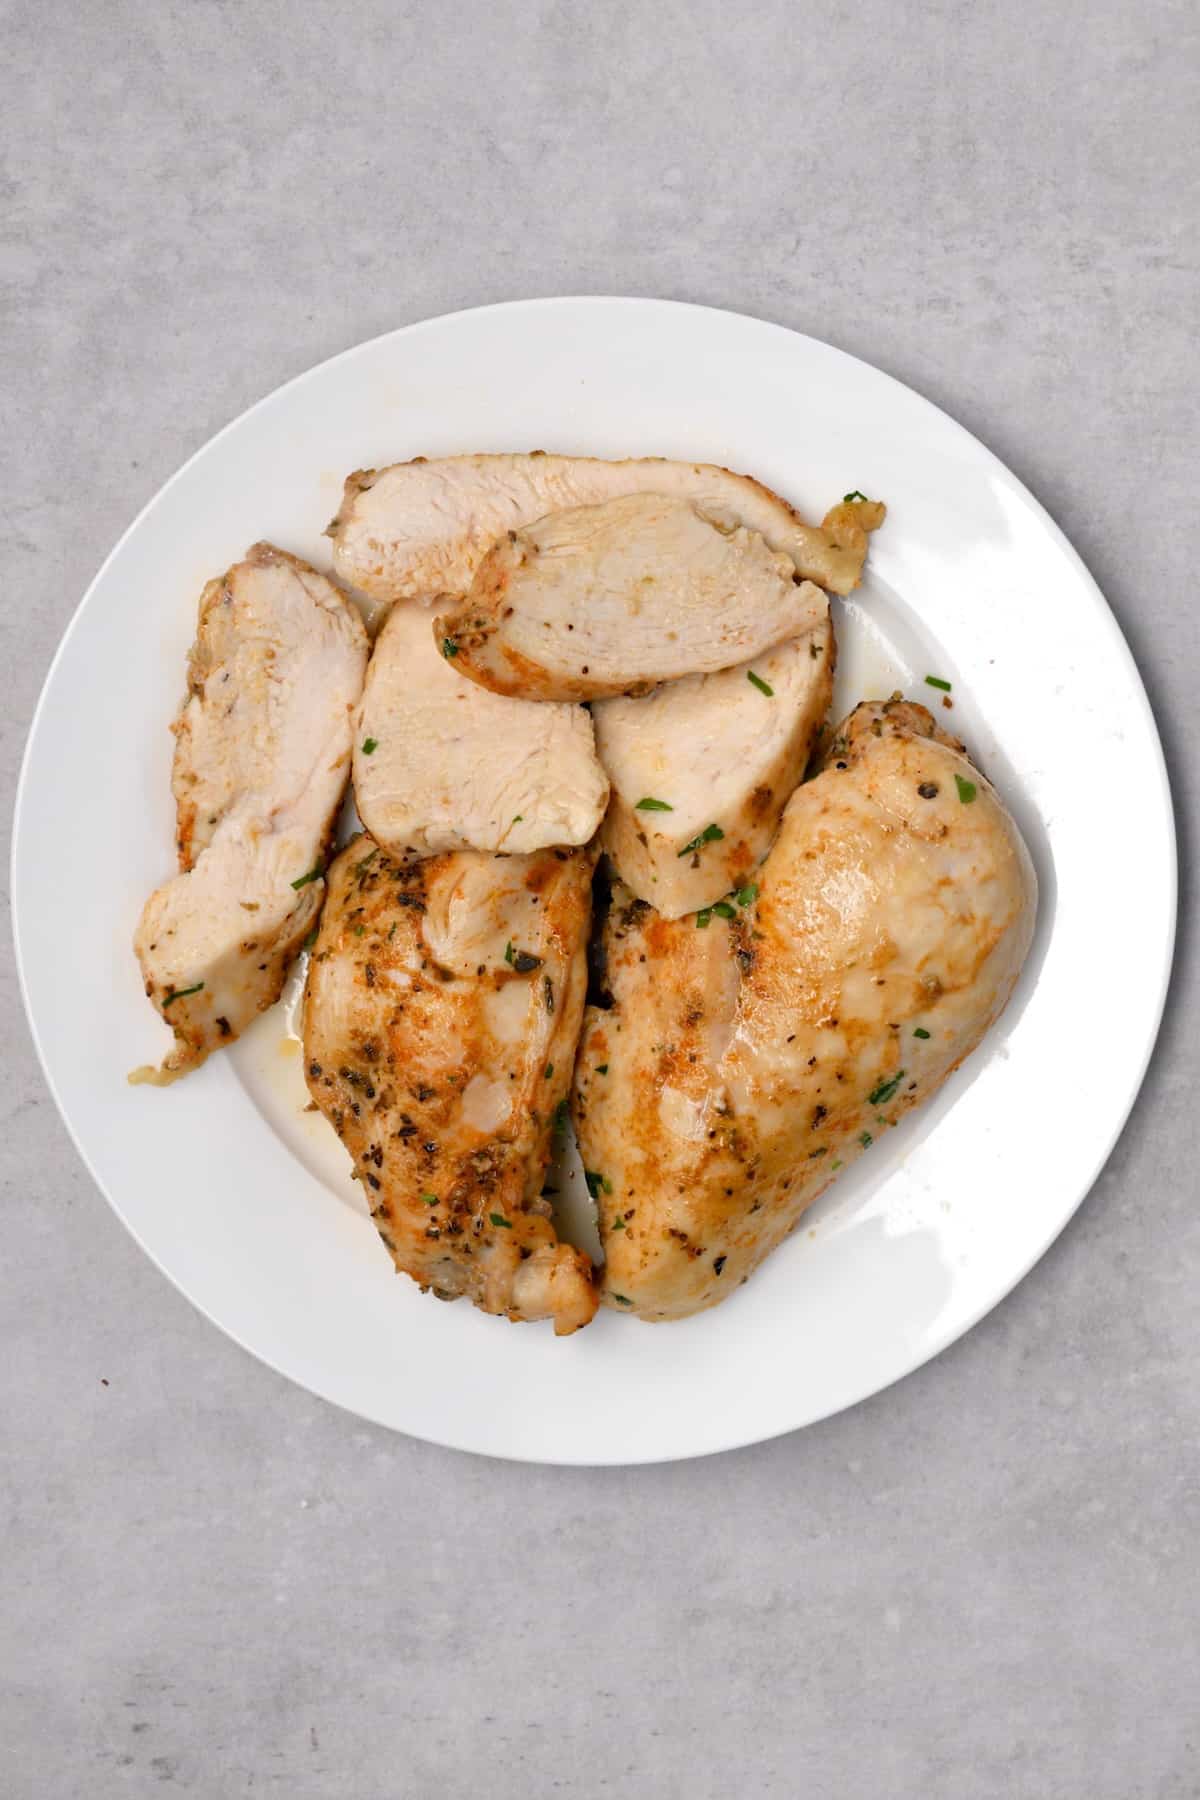 Cooked chicken breasts on a plate